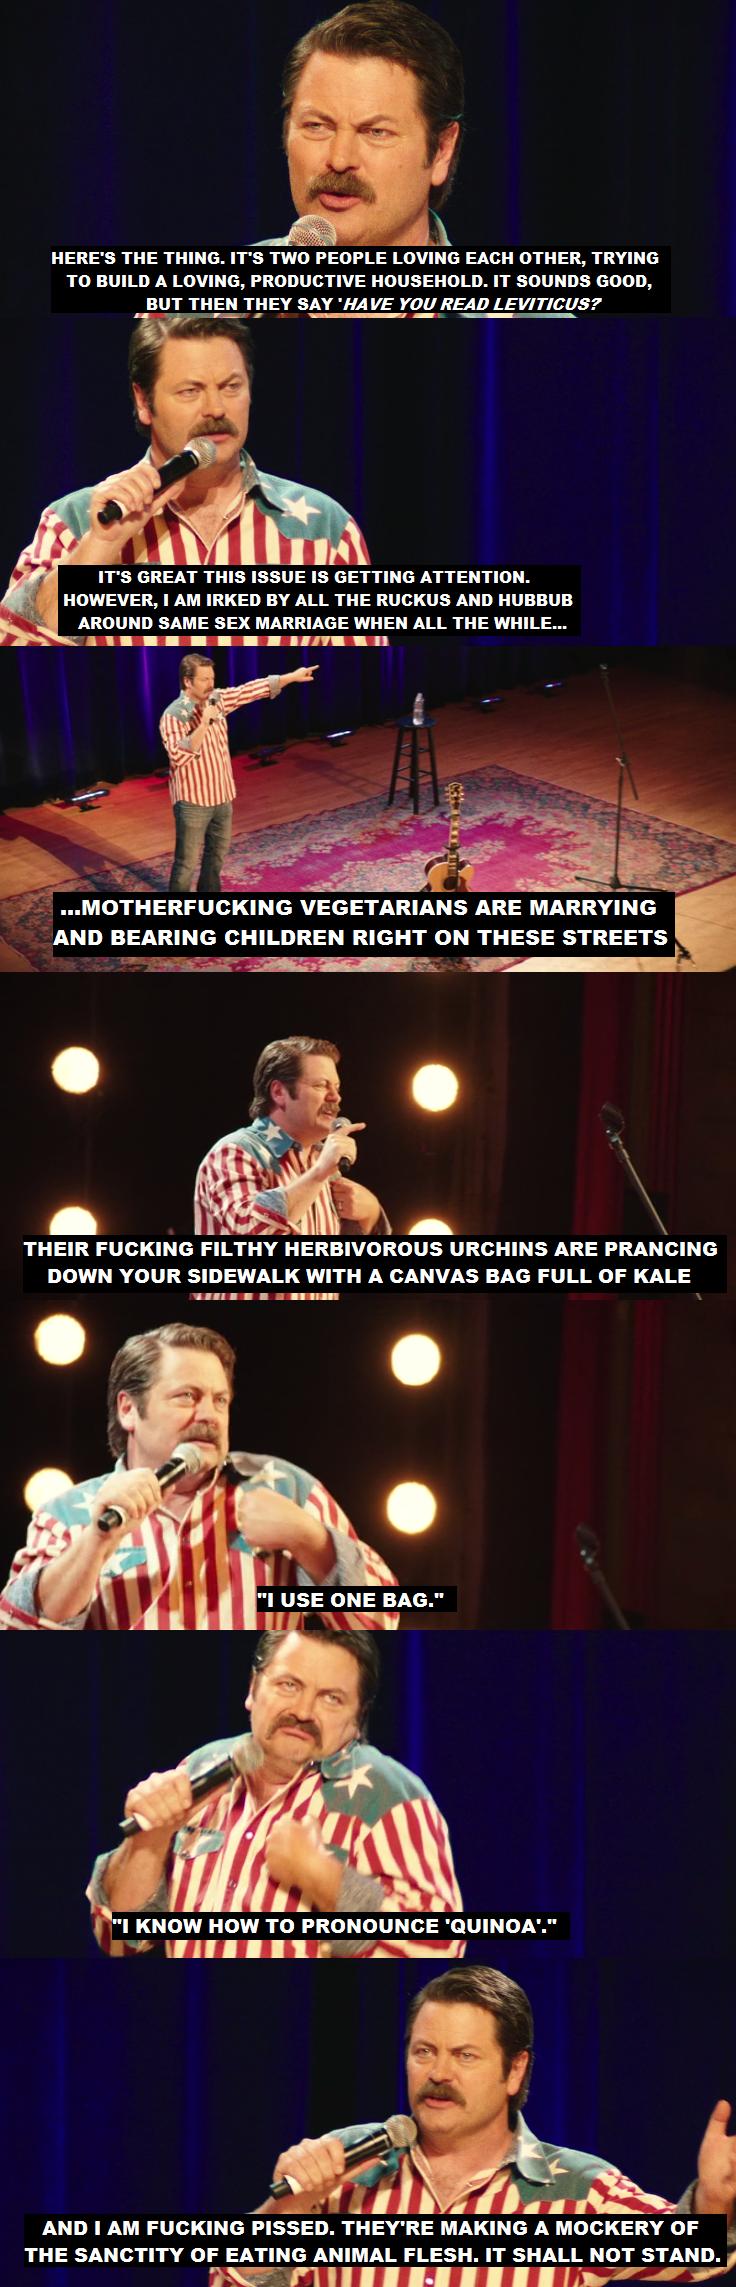 Nick Offerman makes a case for Same Sex Marriage.